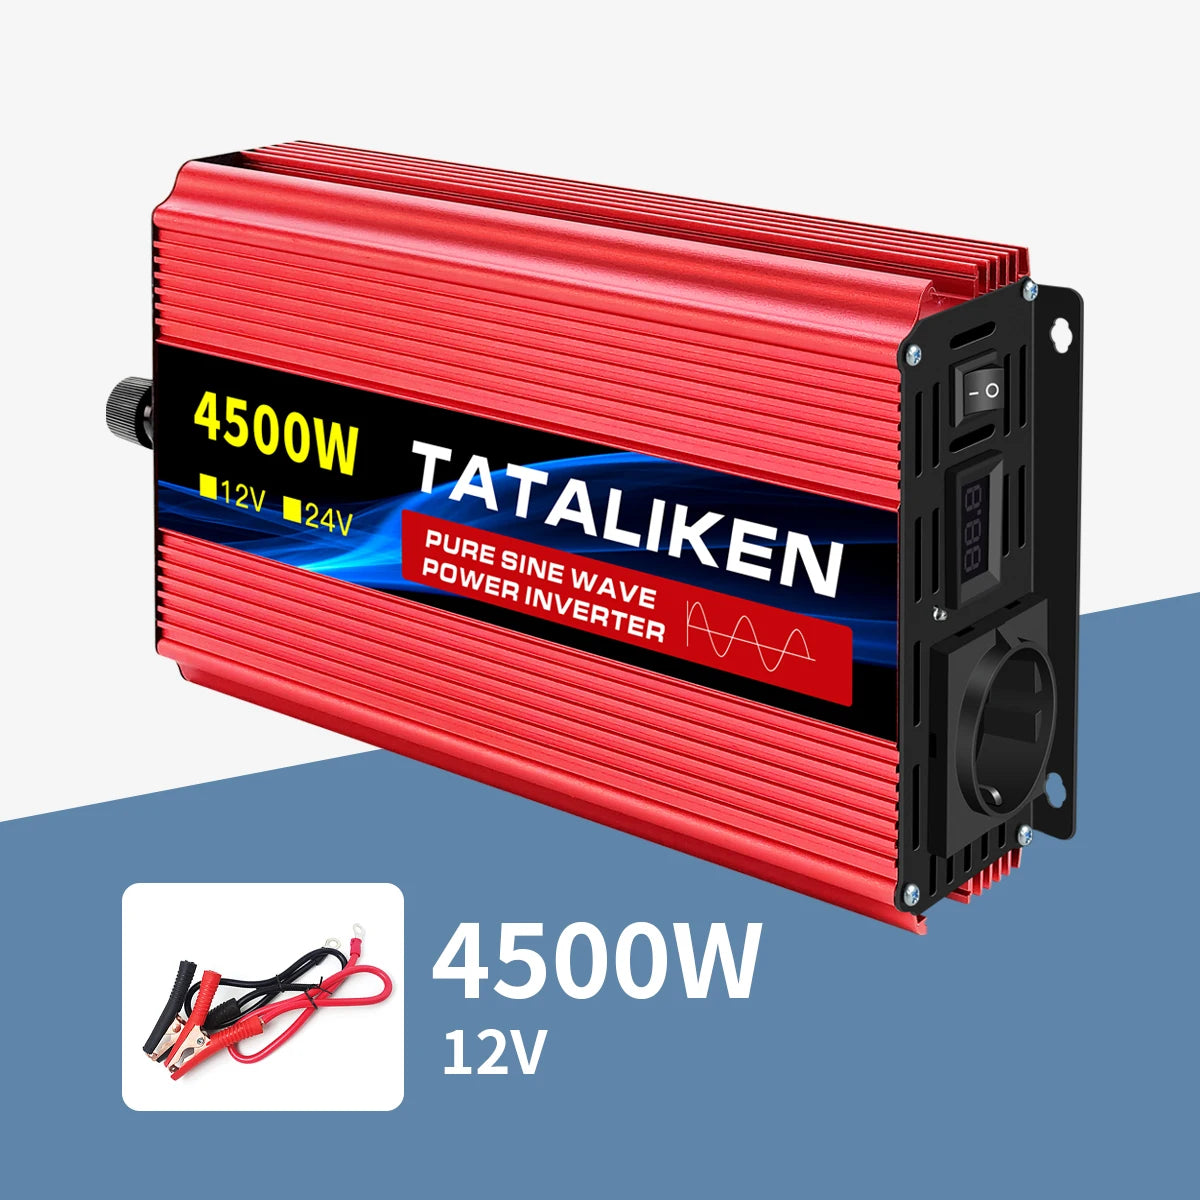 Inverter, Converts DC power to AC power, suitable for auto accessories and charging.